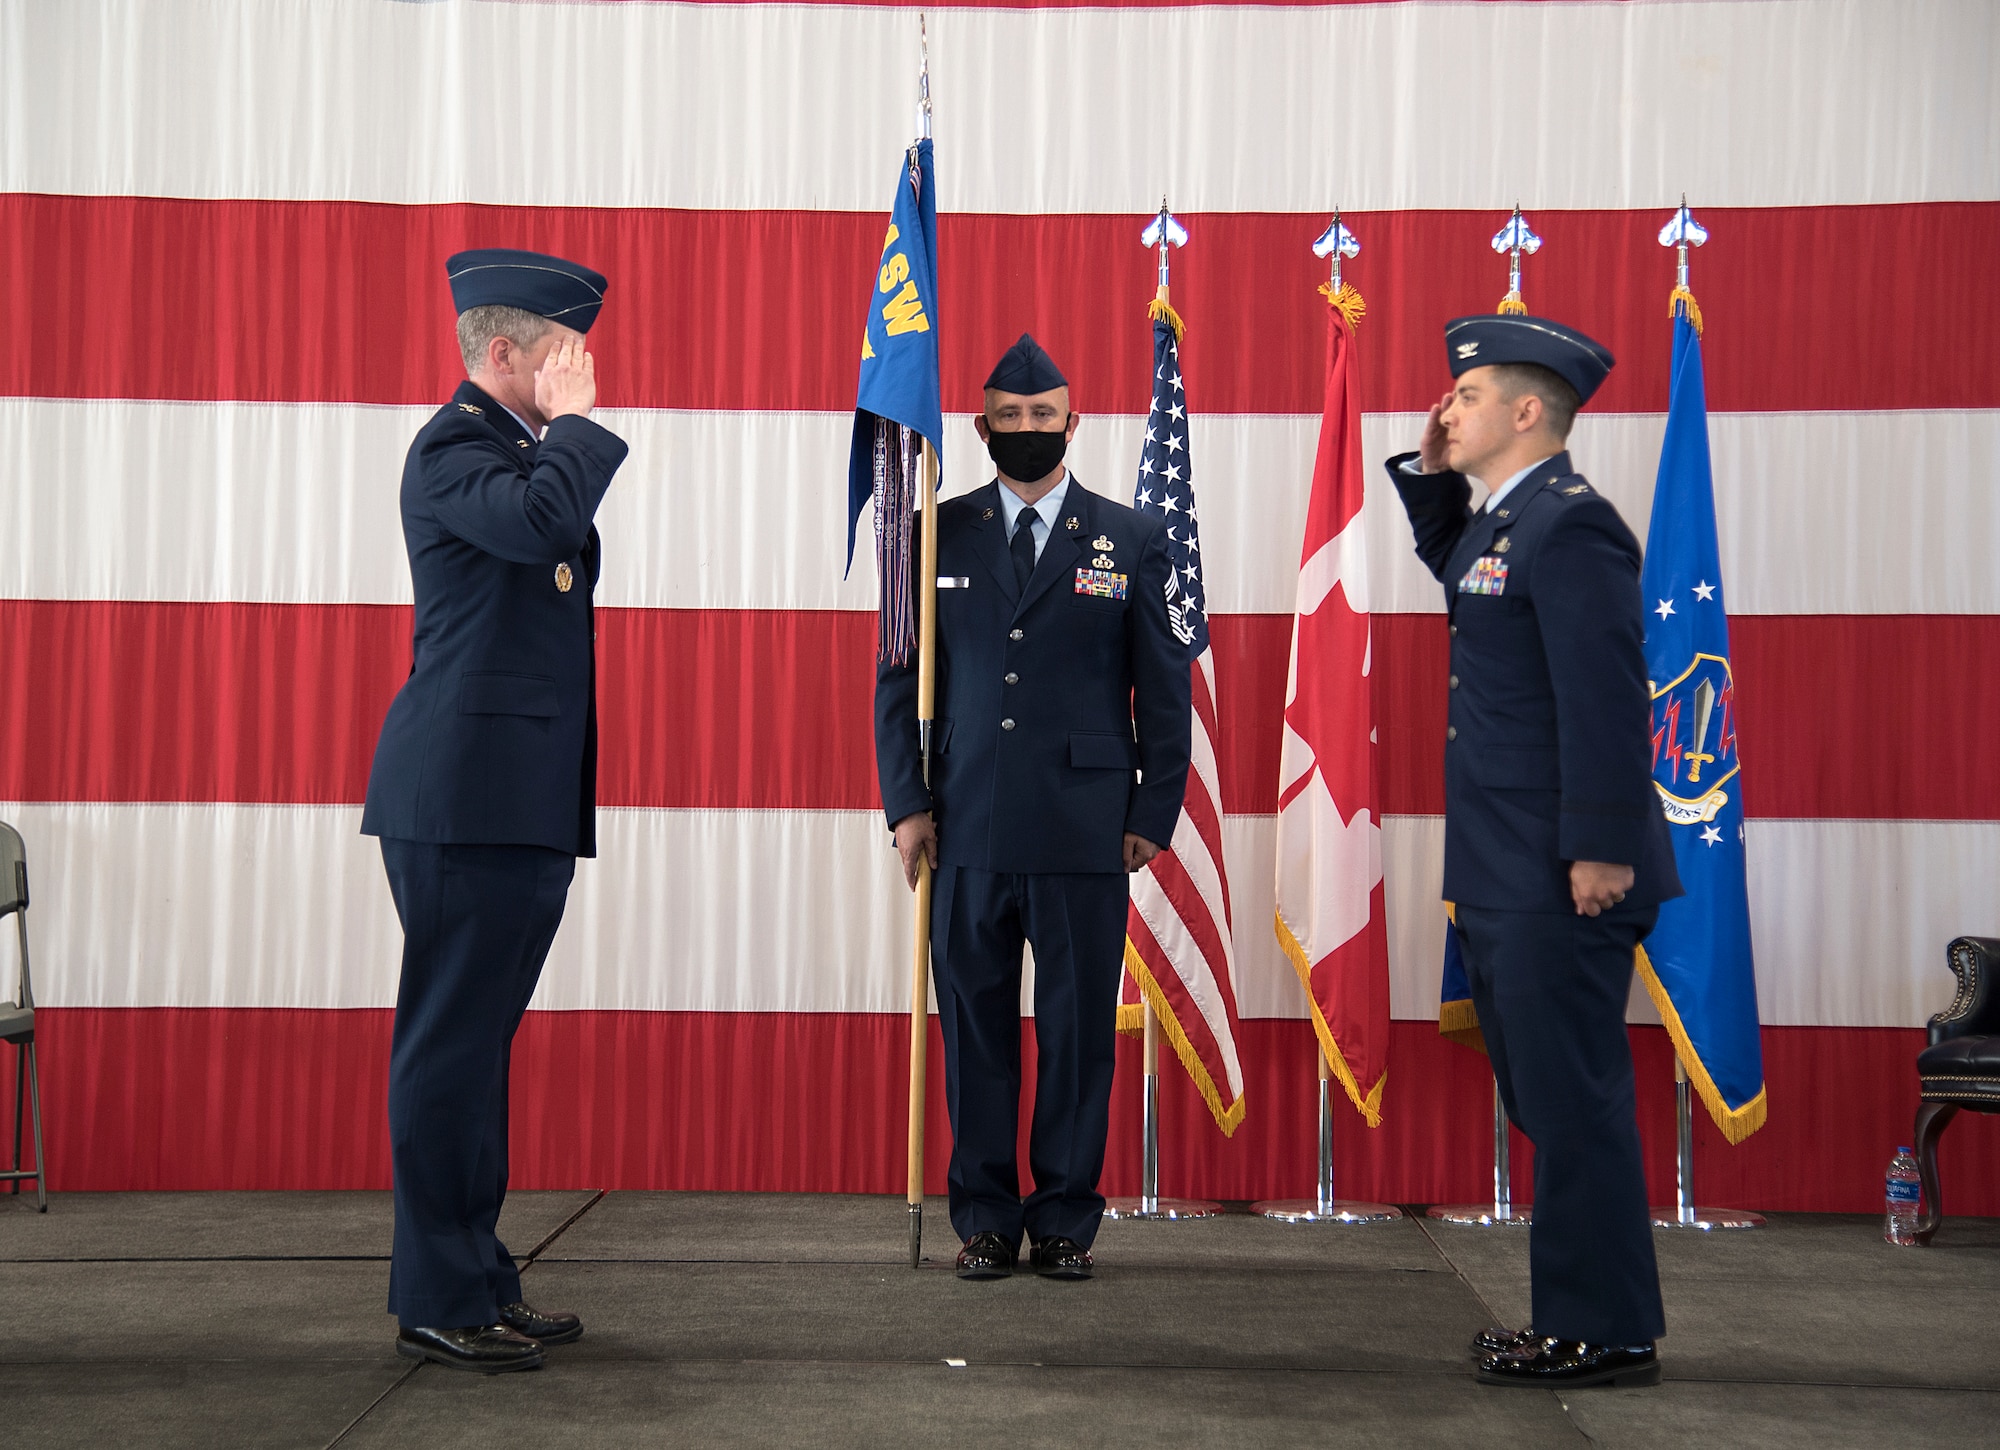 PETERSON AIR FORCE BASE, Colo. - Col. Sam Johnson, 21st Space Wing commander, left, salutes Col. David Wilson as he assumes command of the 21st Mission Support Group during a change of command ceremony June 24, 2020, at Peterson Air Force Base, Colorado. The traditional passing of the guidon did not occur in order to maintain proper physical distancing guidelines during the ceremony. (U.S. Air Force photo by Kristen Allen)